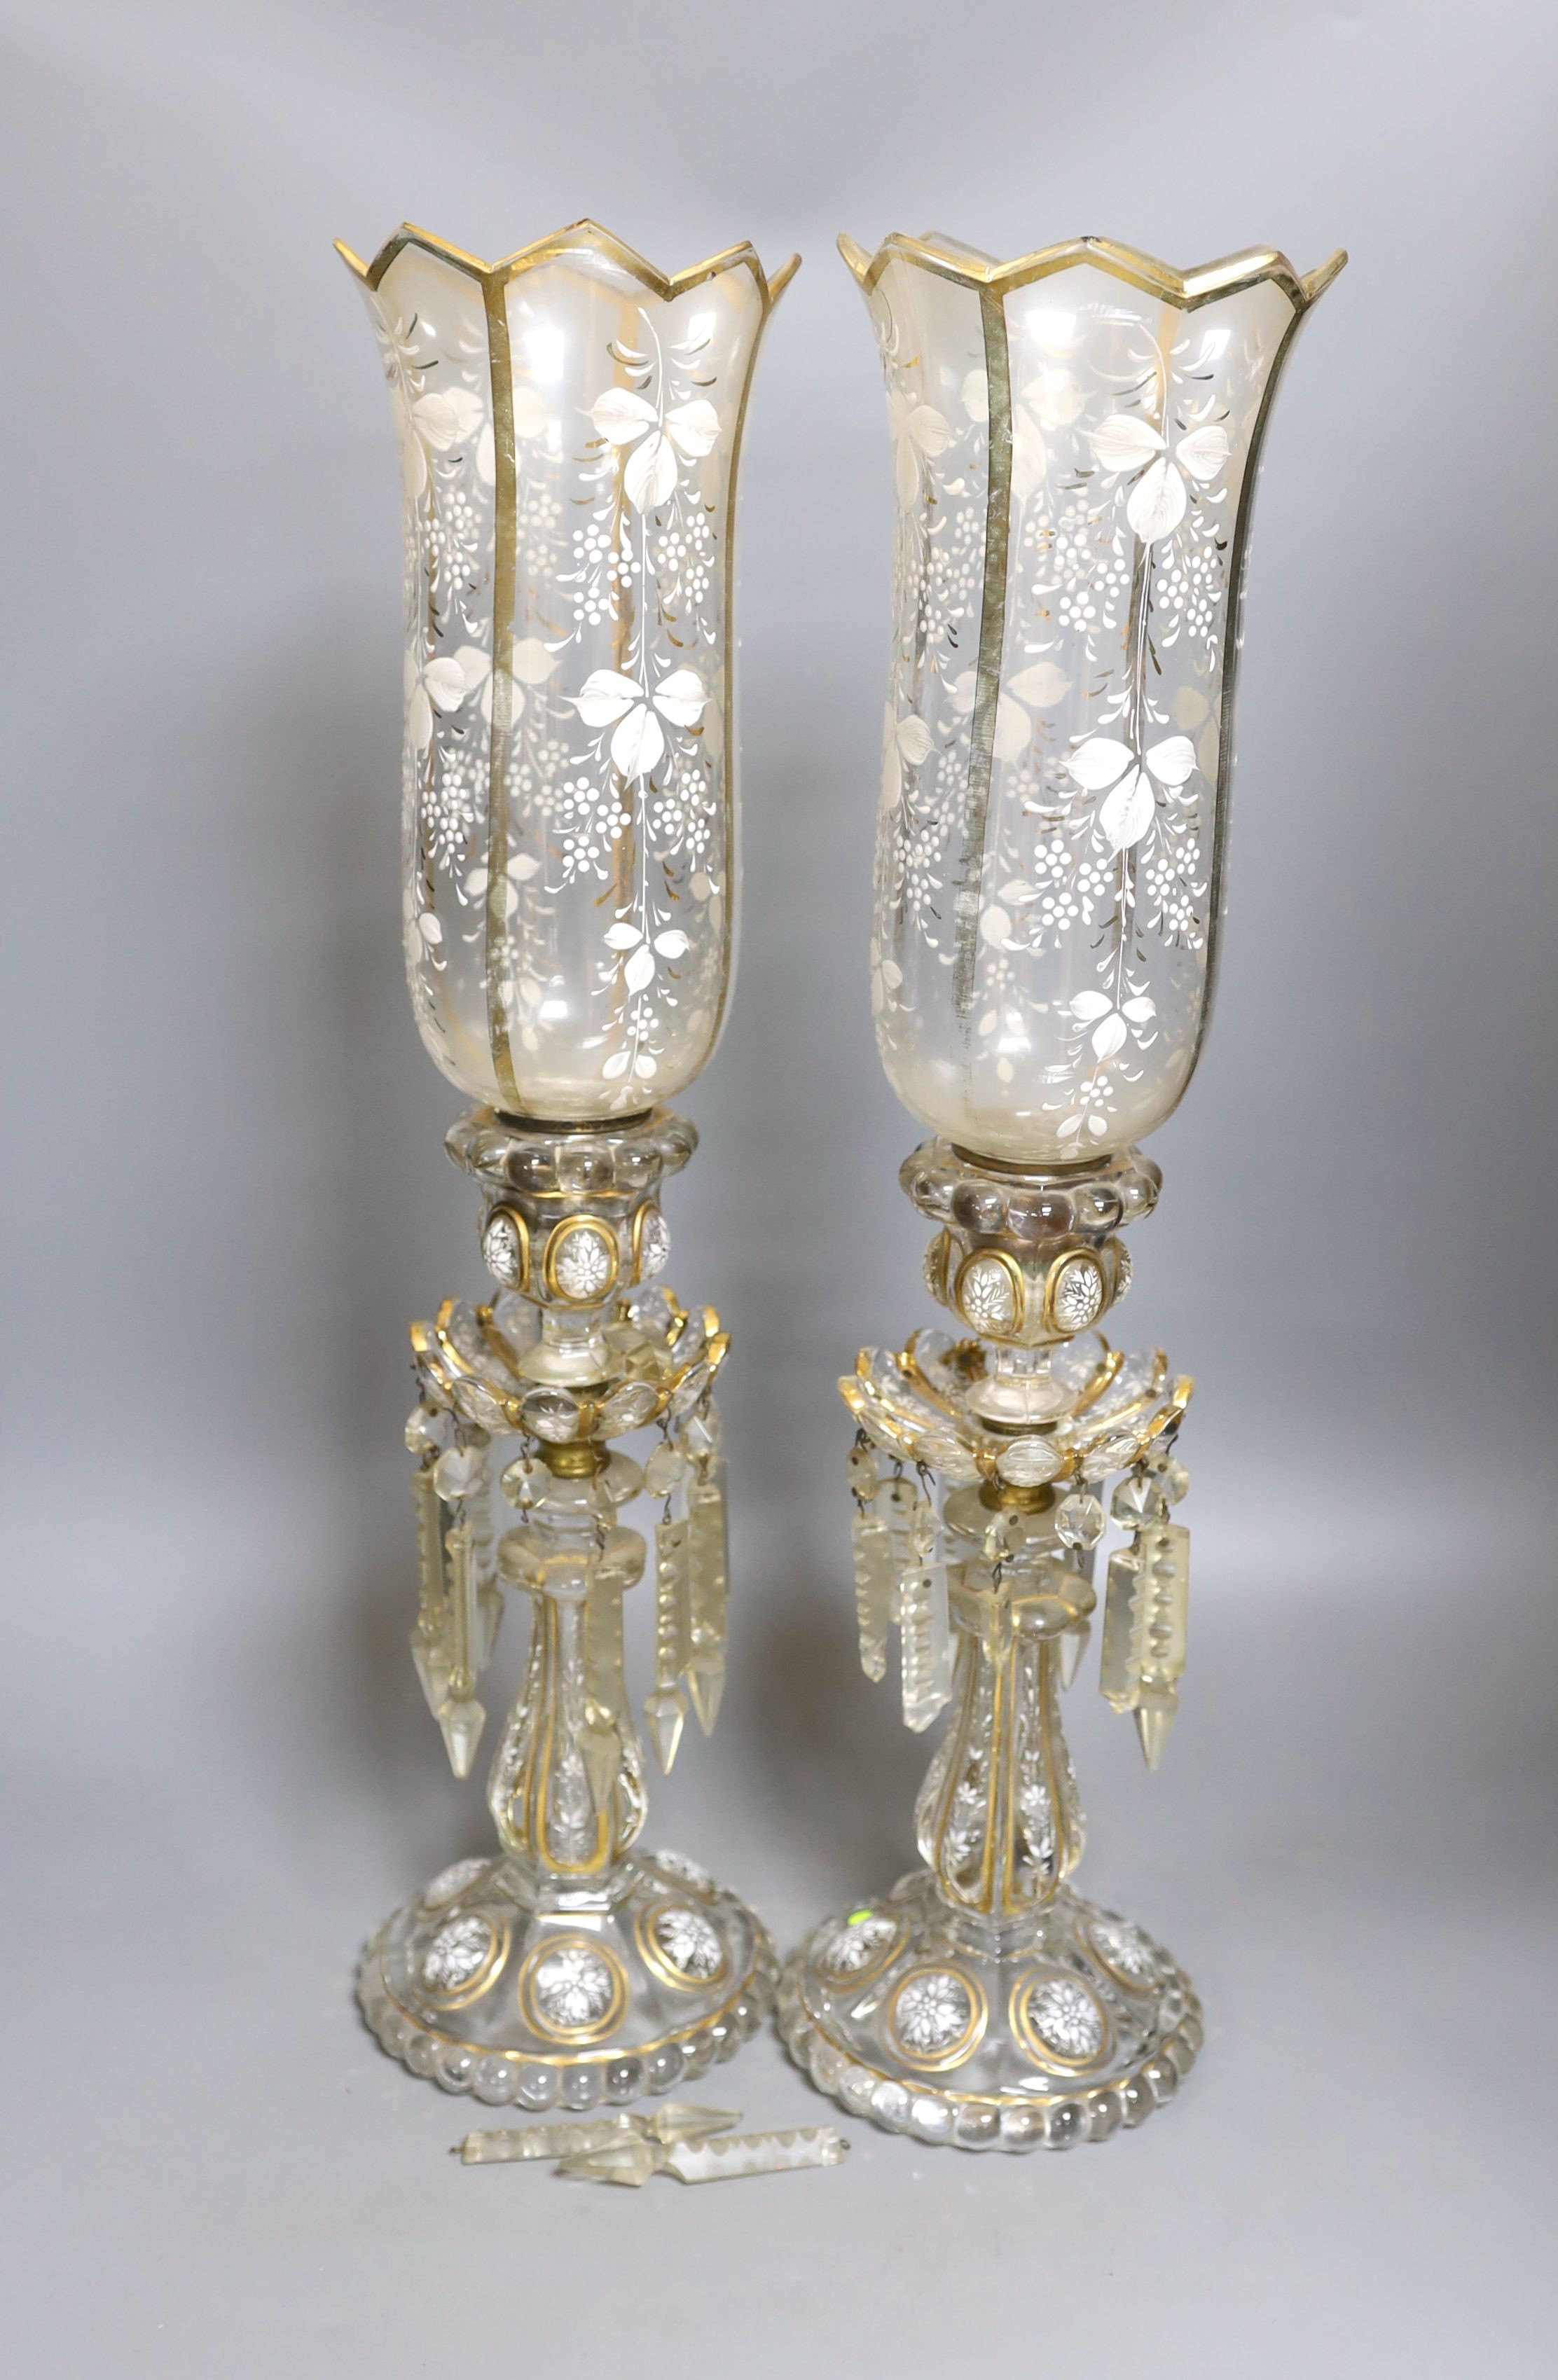 A pair of late 19th century French white-enamelled glass lustre hung storm lamps, 55cms high.